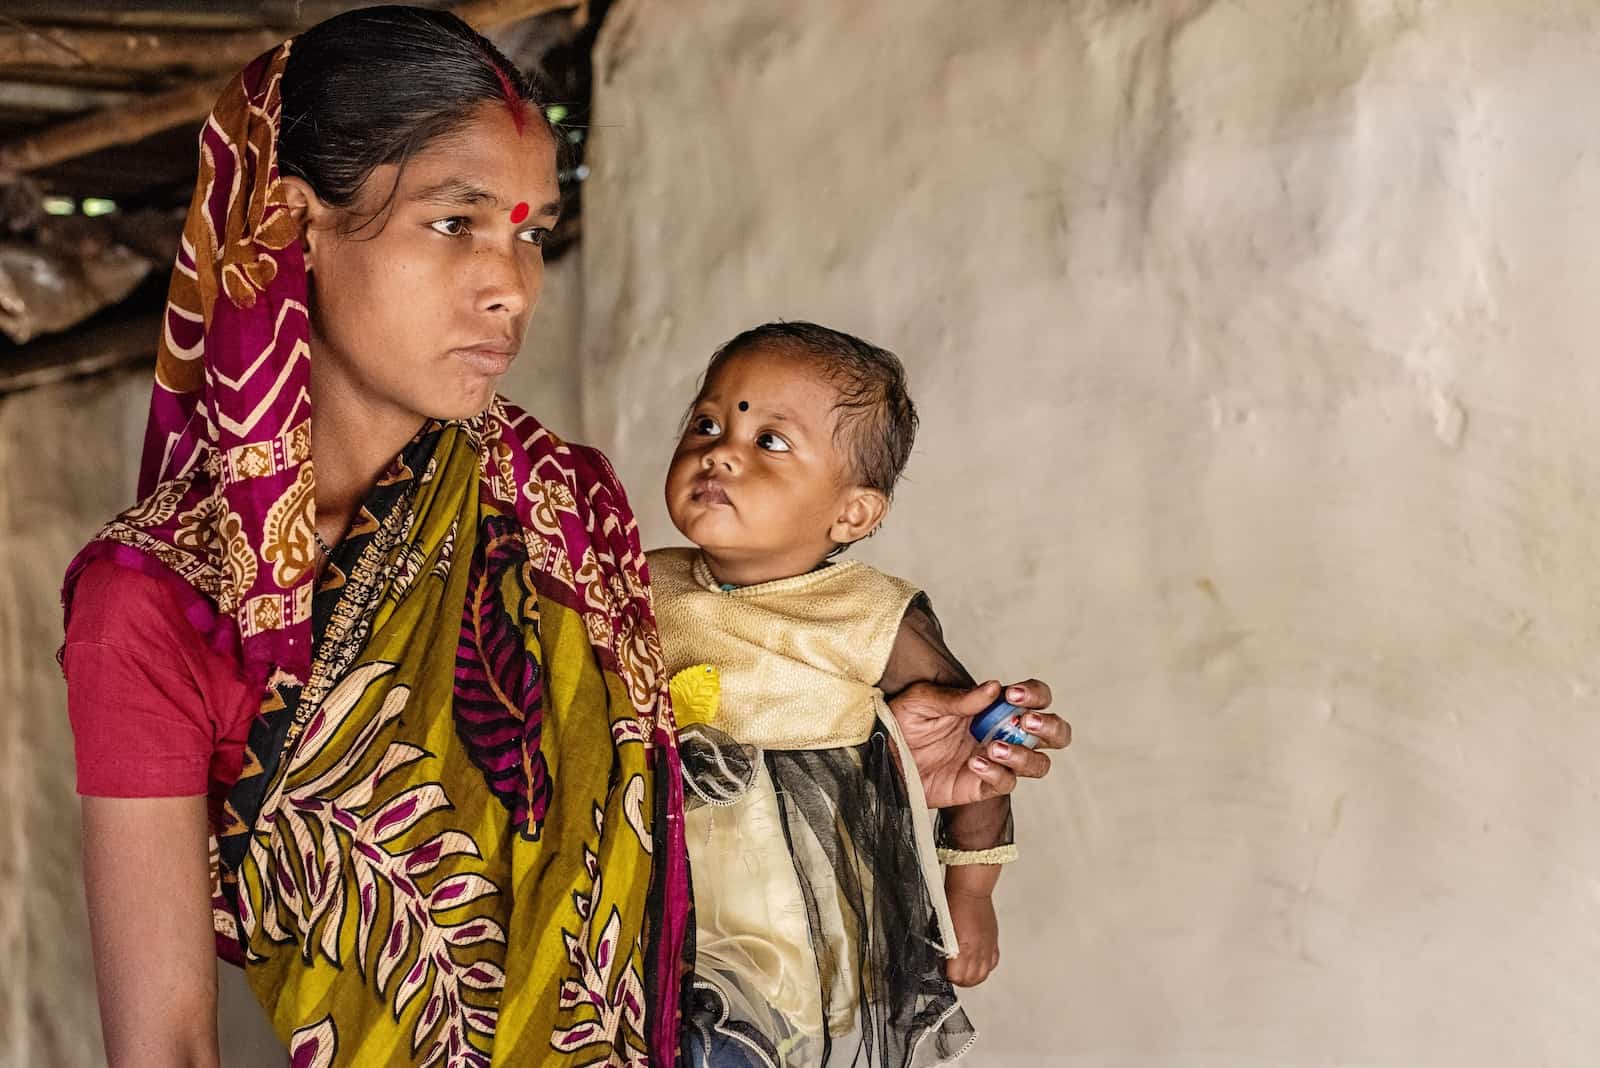 A woman in a colorful sari with a red bindi on her forehead holds a baby girl, who is looking at her. Report: Hunger Is on the Rise Around the World